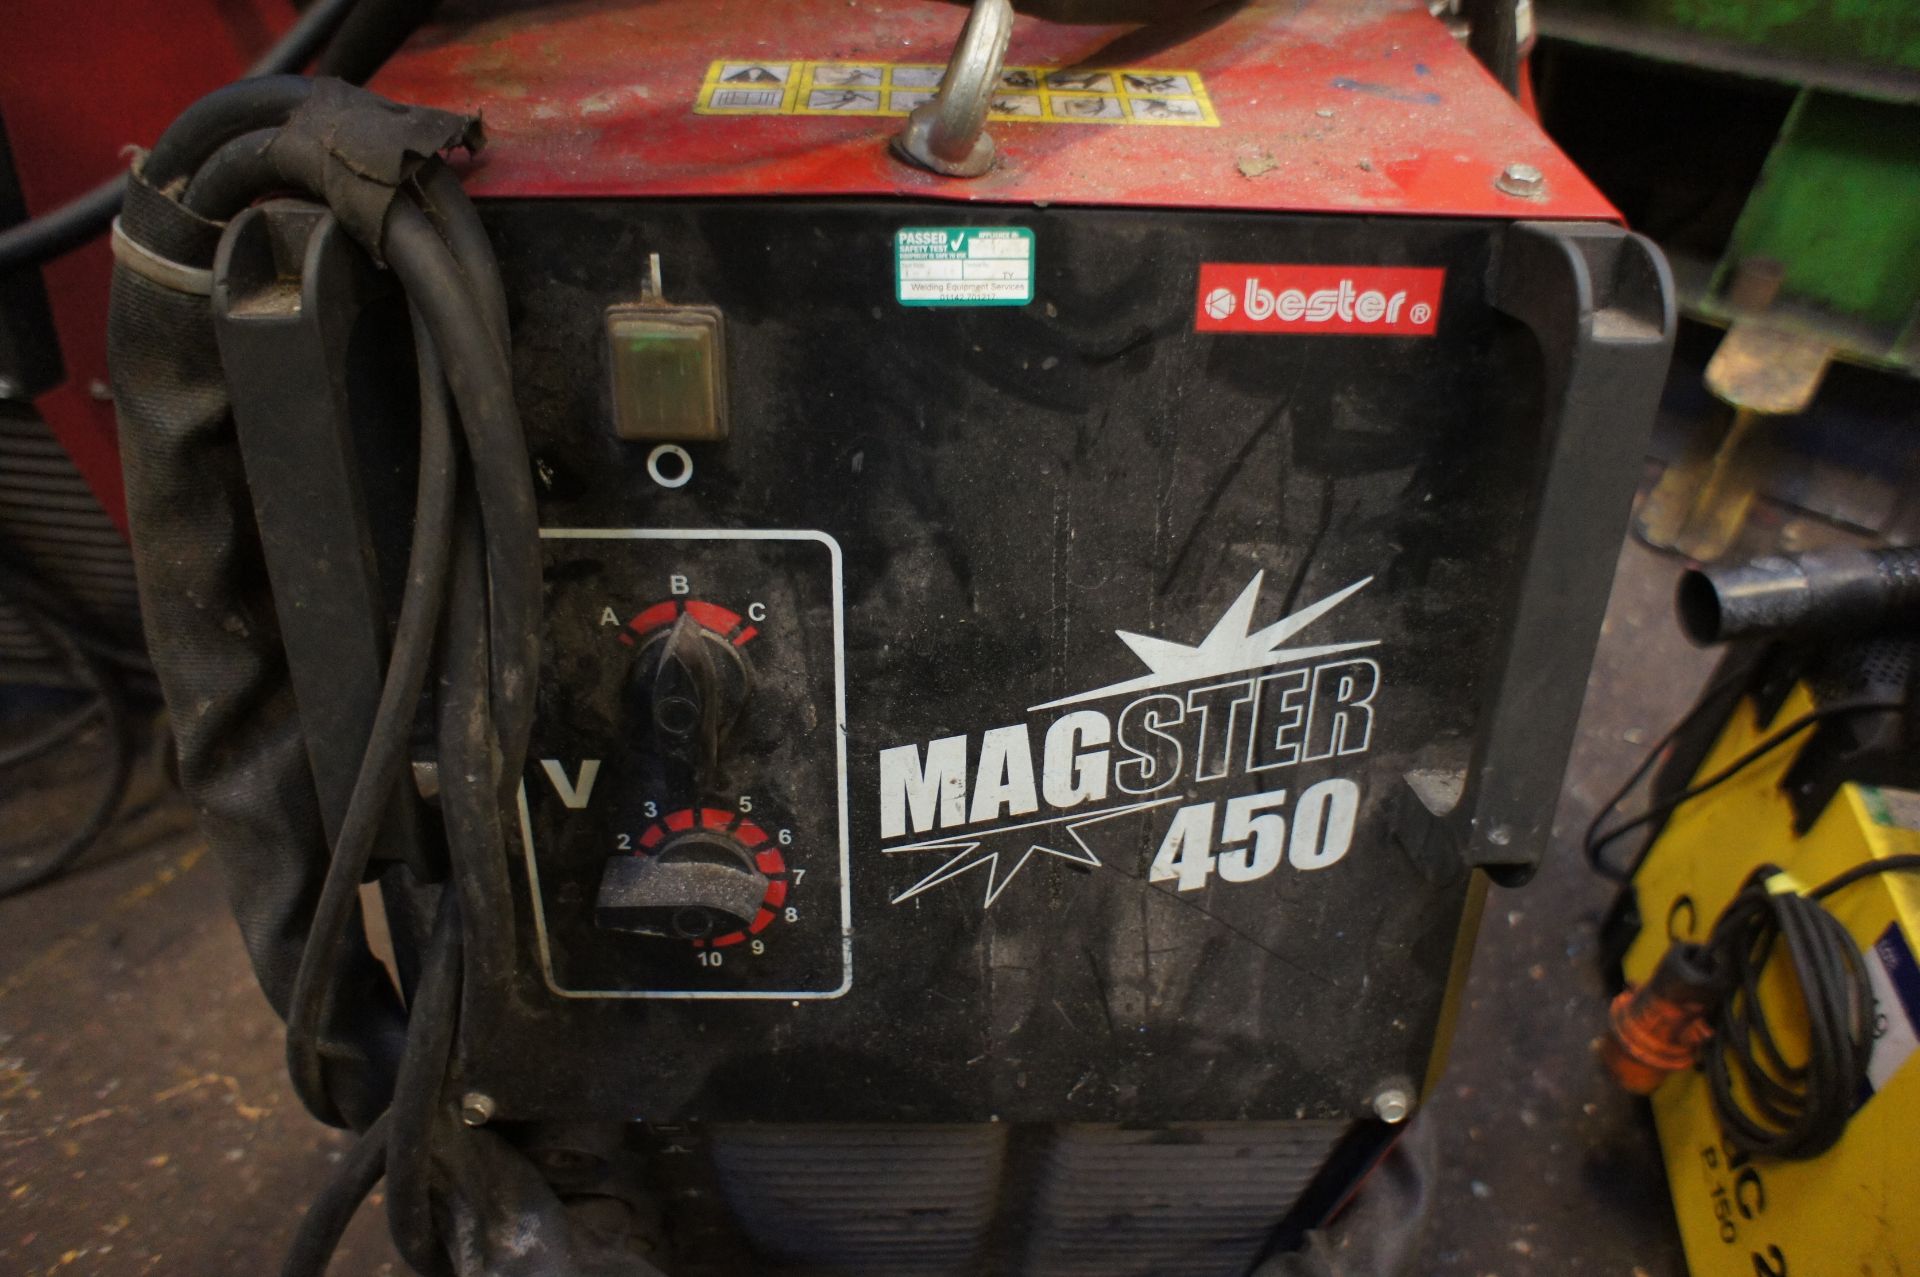 Lincoln Bester Magster 450 Mig Welding Set, 450amp - Image 4 of 6